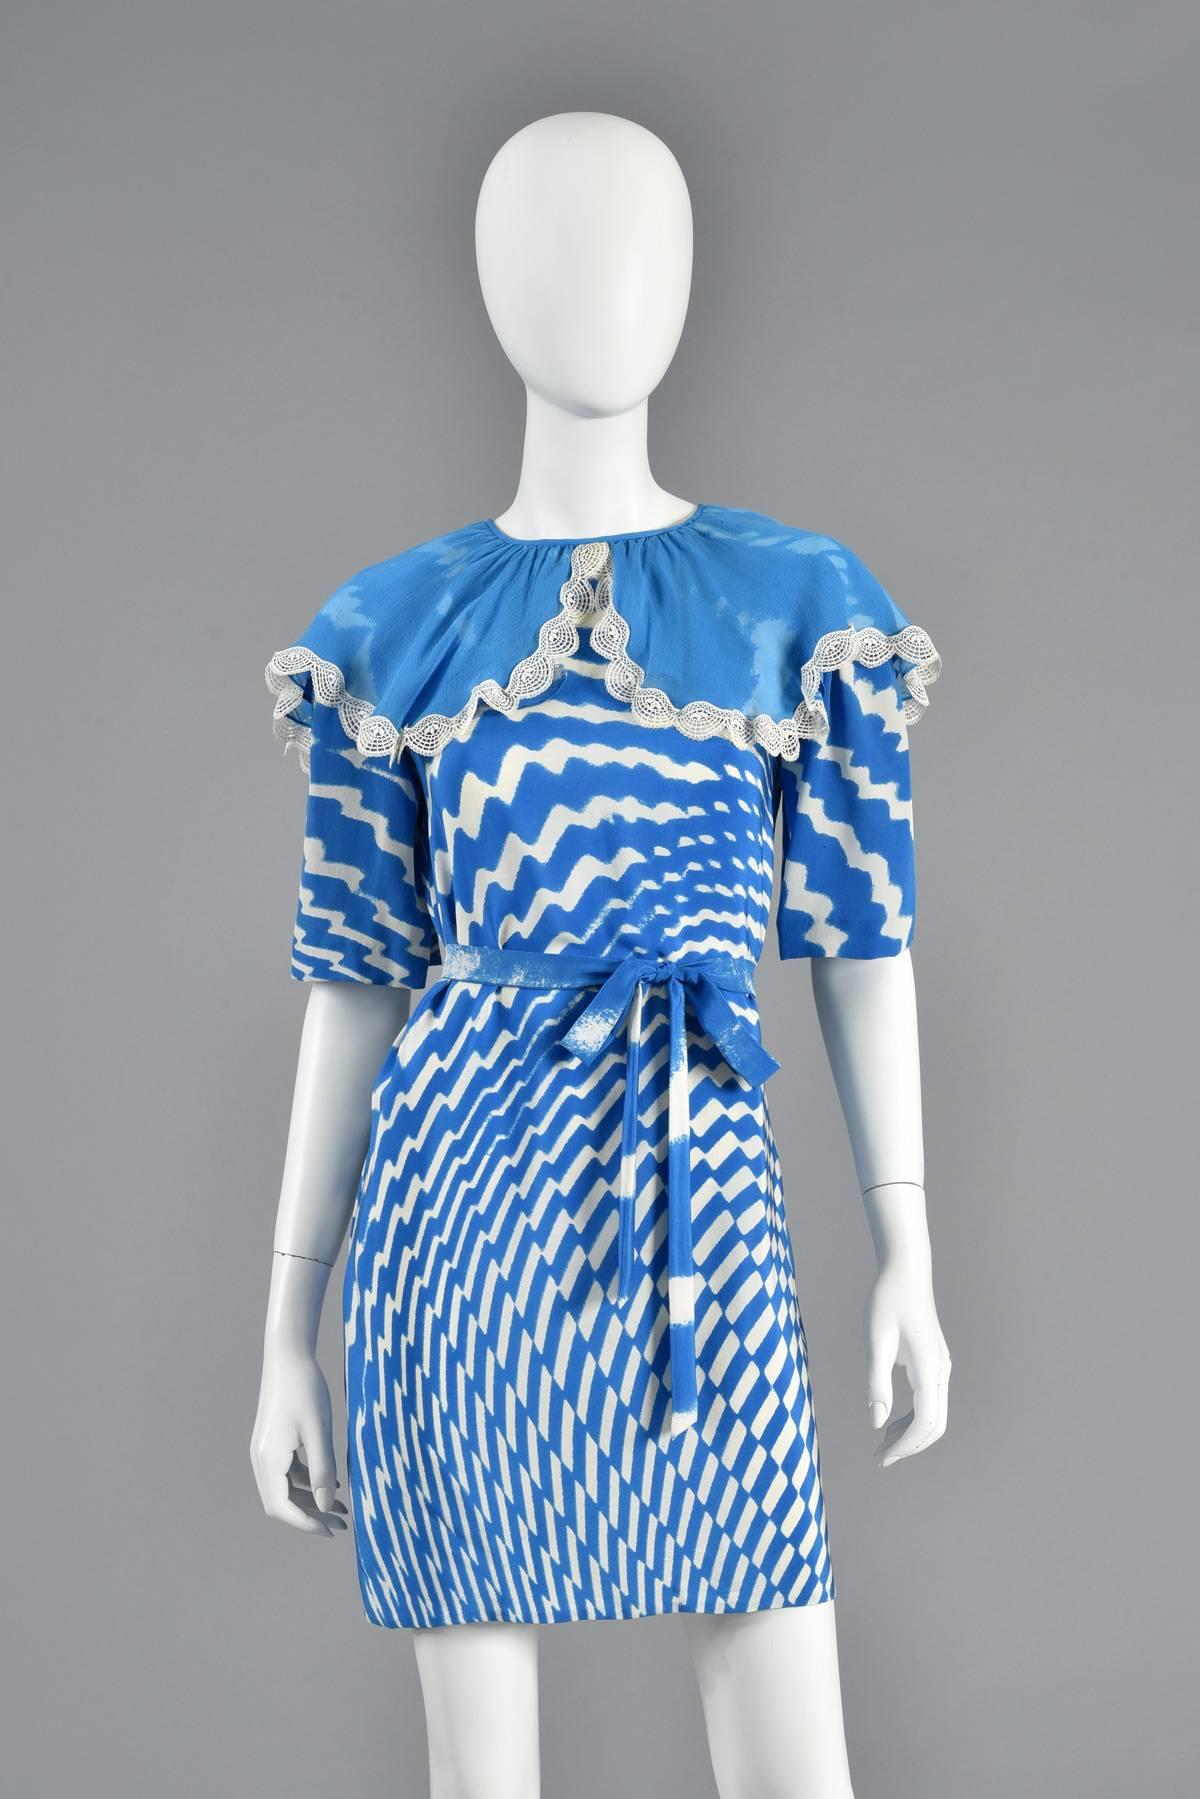 Thea Porter Couture Op Art Mini Dress In Excellent Condition For Sale In Yucca Valley, CA